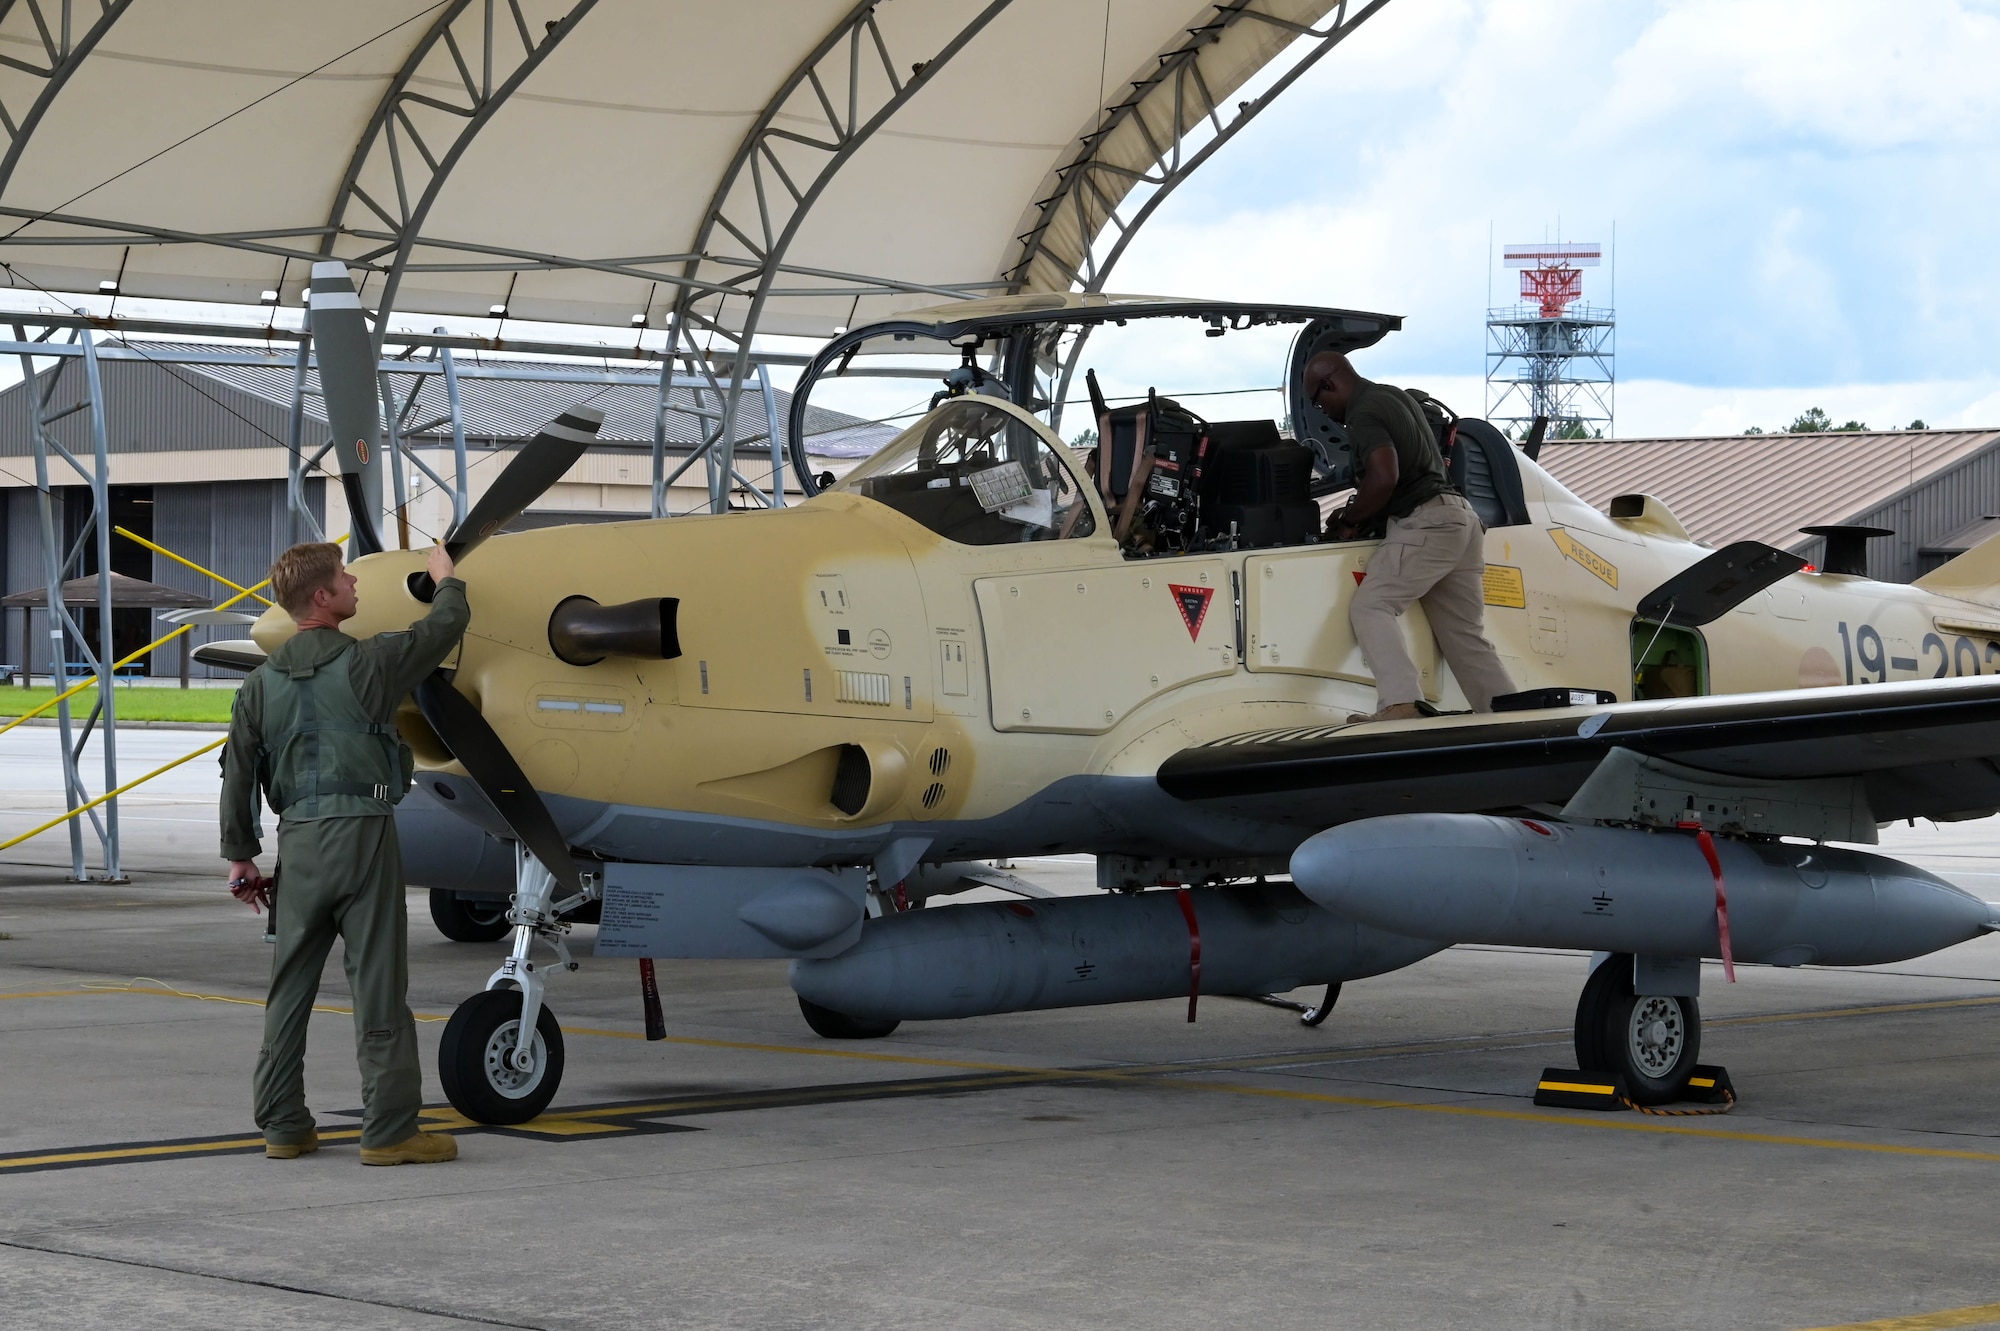 An A-29 Super Tucano aircraft pilot from the 81st Fighter Squadron, left, performs a preflight inspection at Moody Air Force Base, Georgia, Sept. 15, 2021. After more than a year of training, the final batch of aircraft are finally being sent to Nigeria. (U.S. Air Force photo by Senior Airman Rebeckah Medeiros)